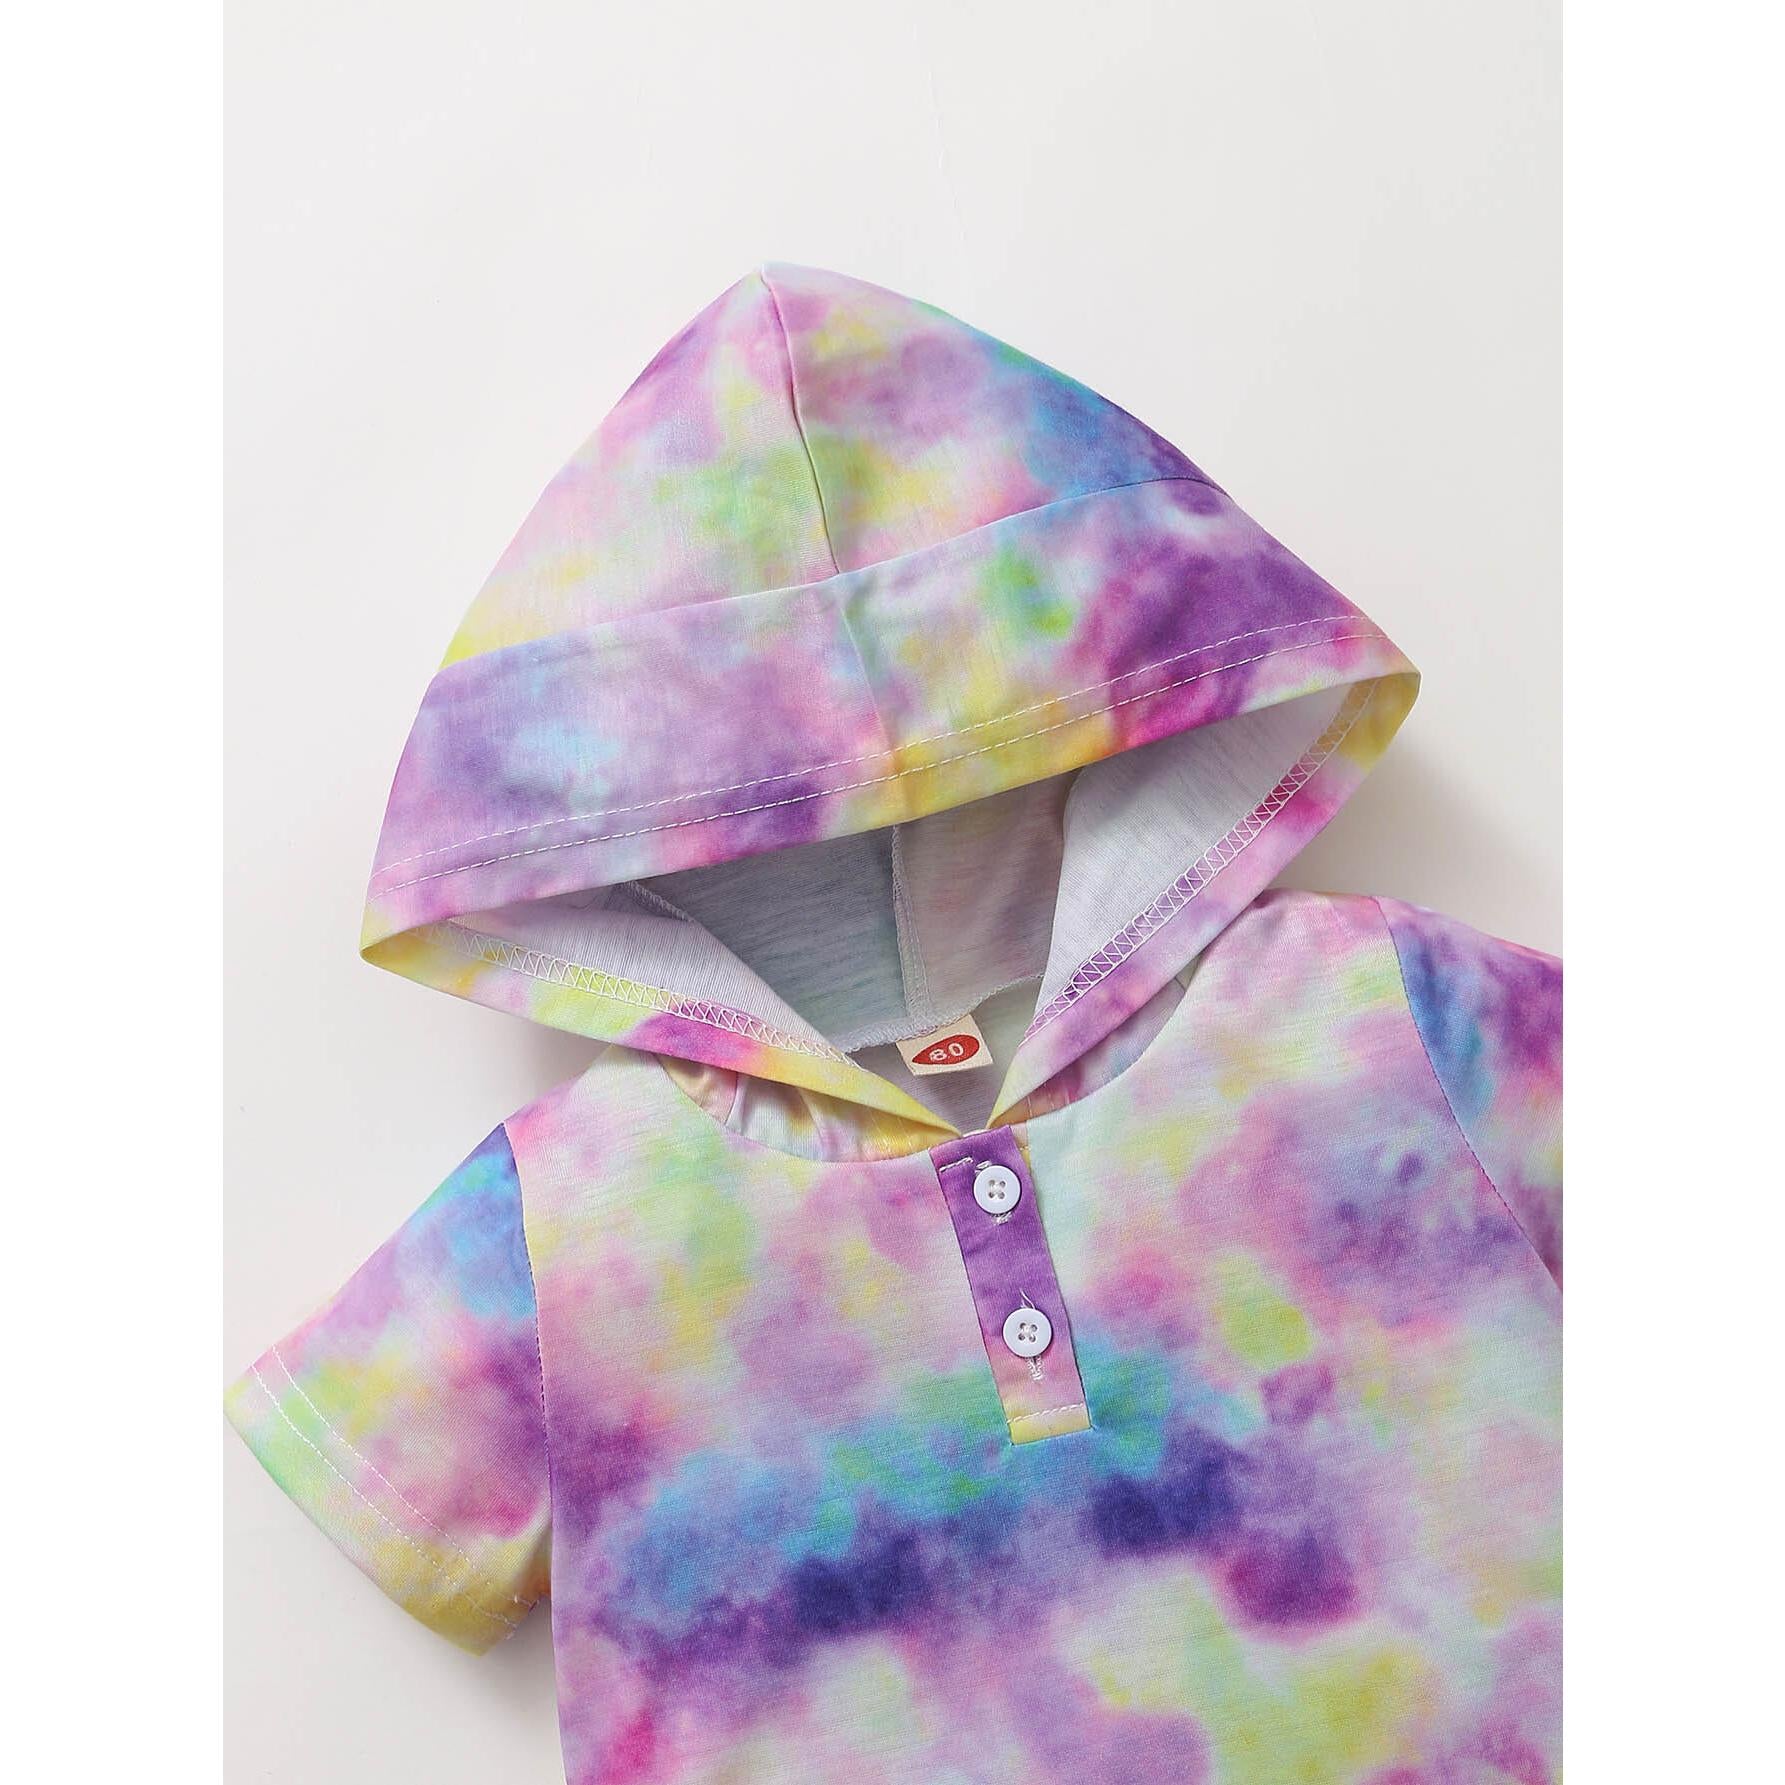 3-24M Kids Fashion Girl Clothes Shorts Outfits Tie-dyed Hooded Short Sleeve Shirt Top Shorts  Set Catpapa 22011261